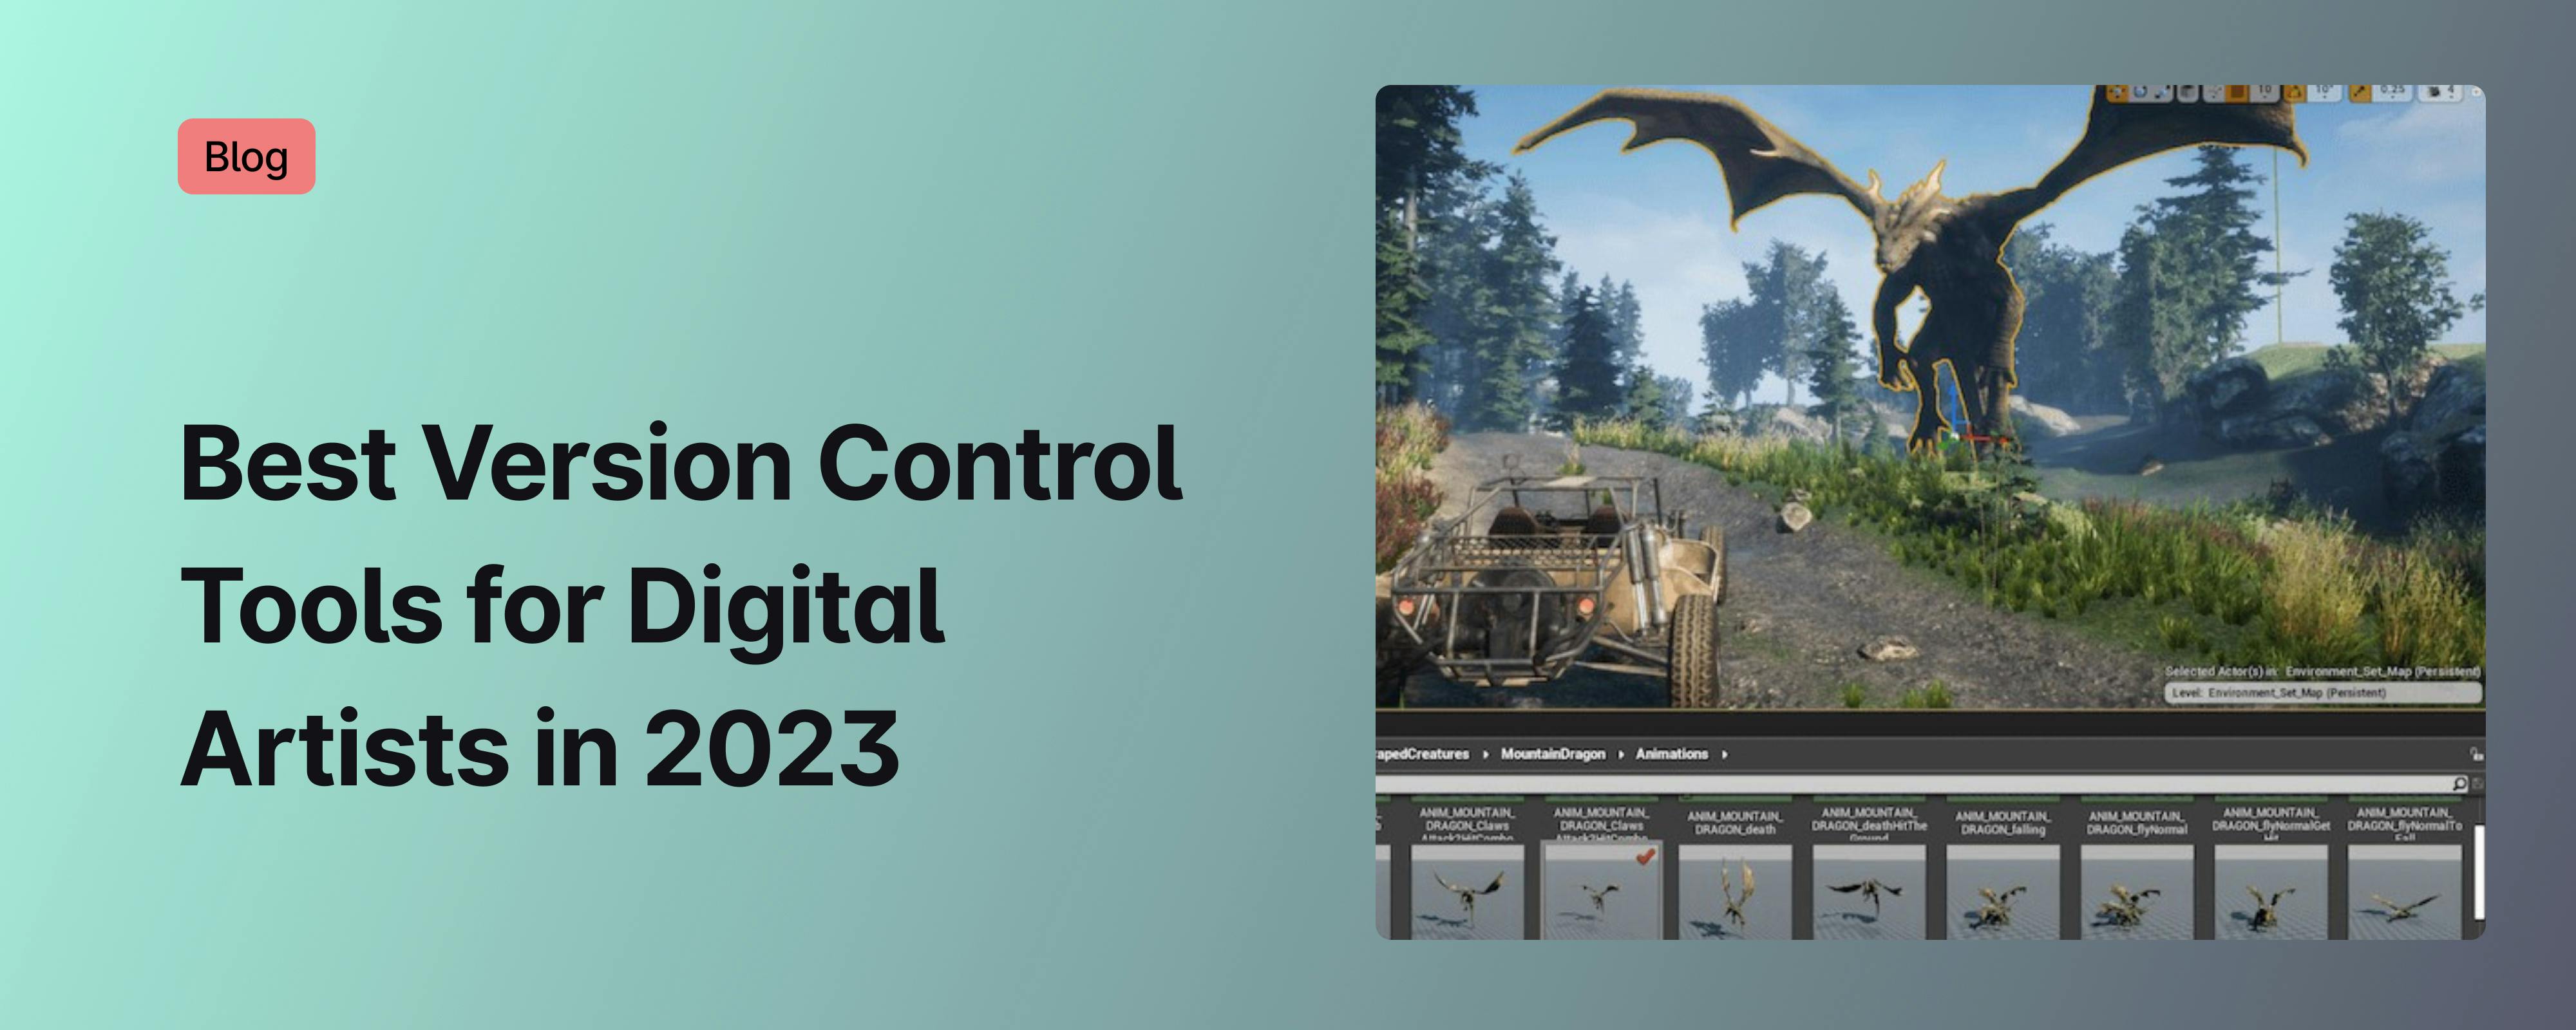  Best Version Control Tools for Digital Artists in 2023